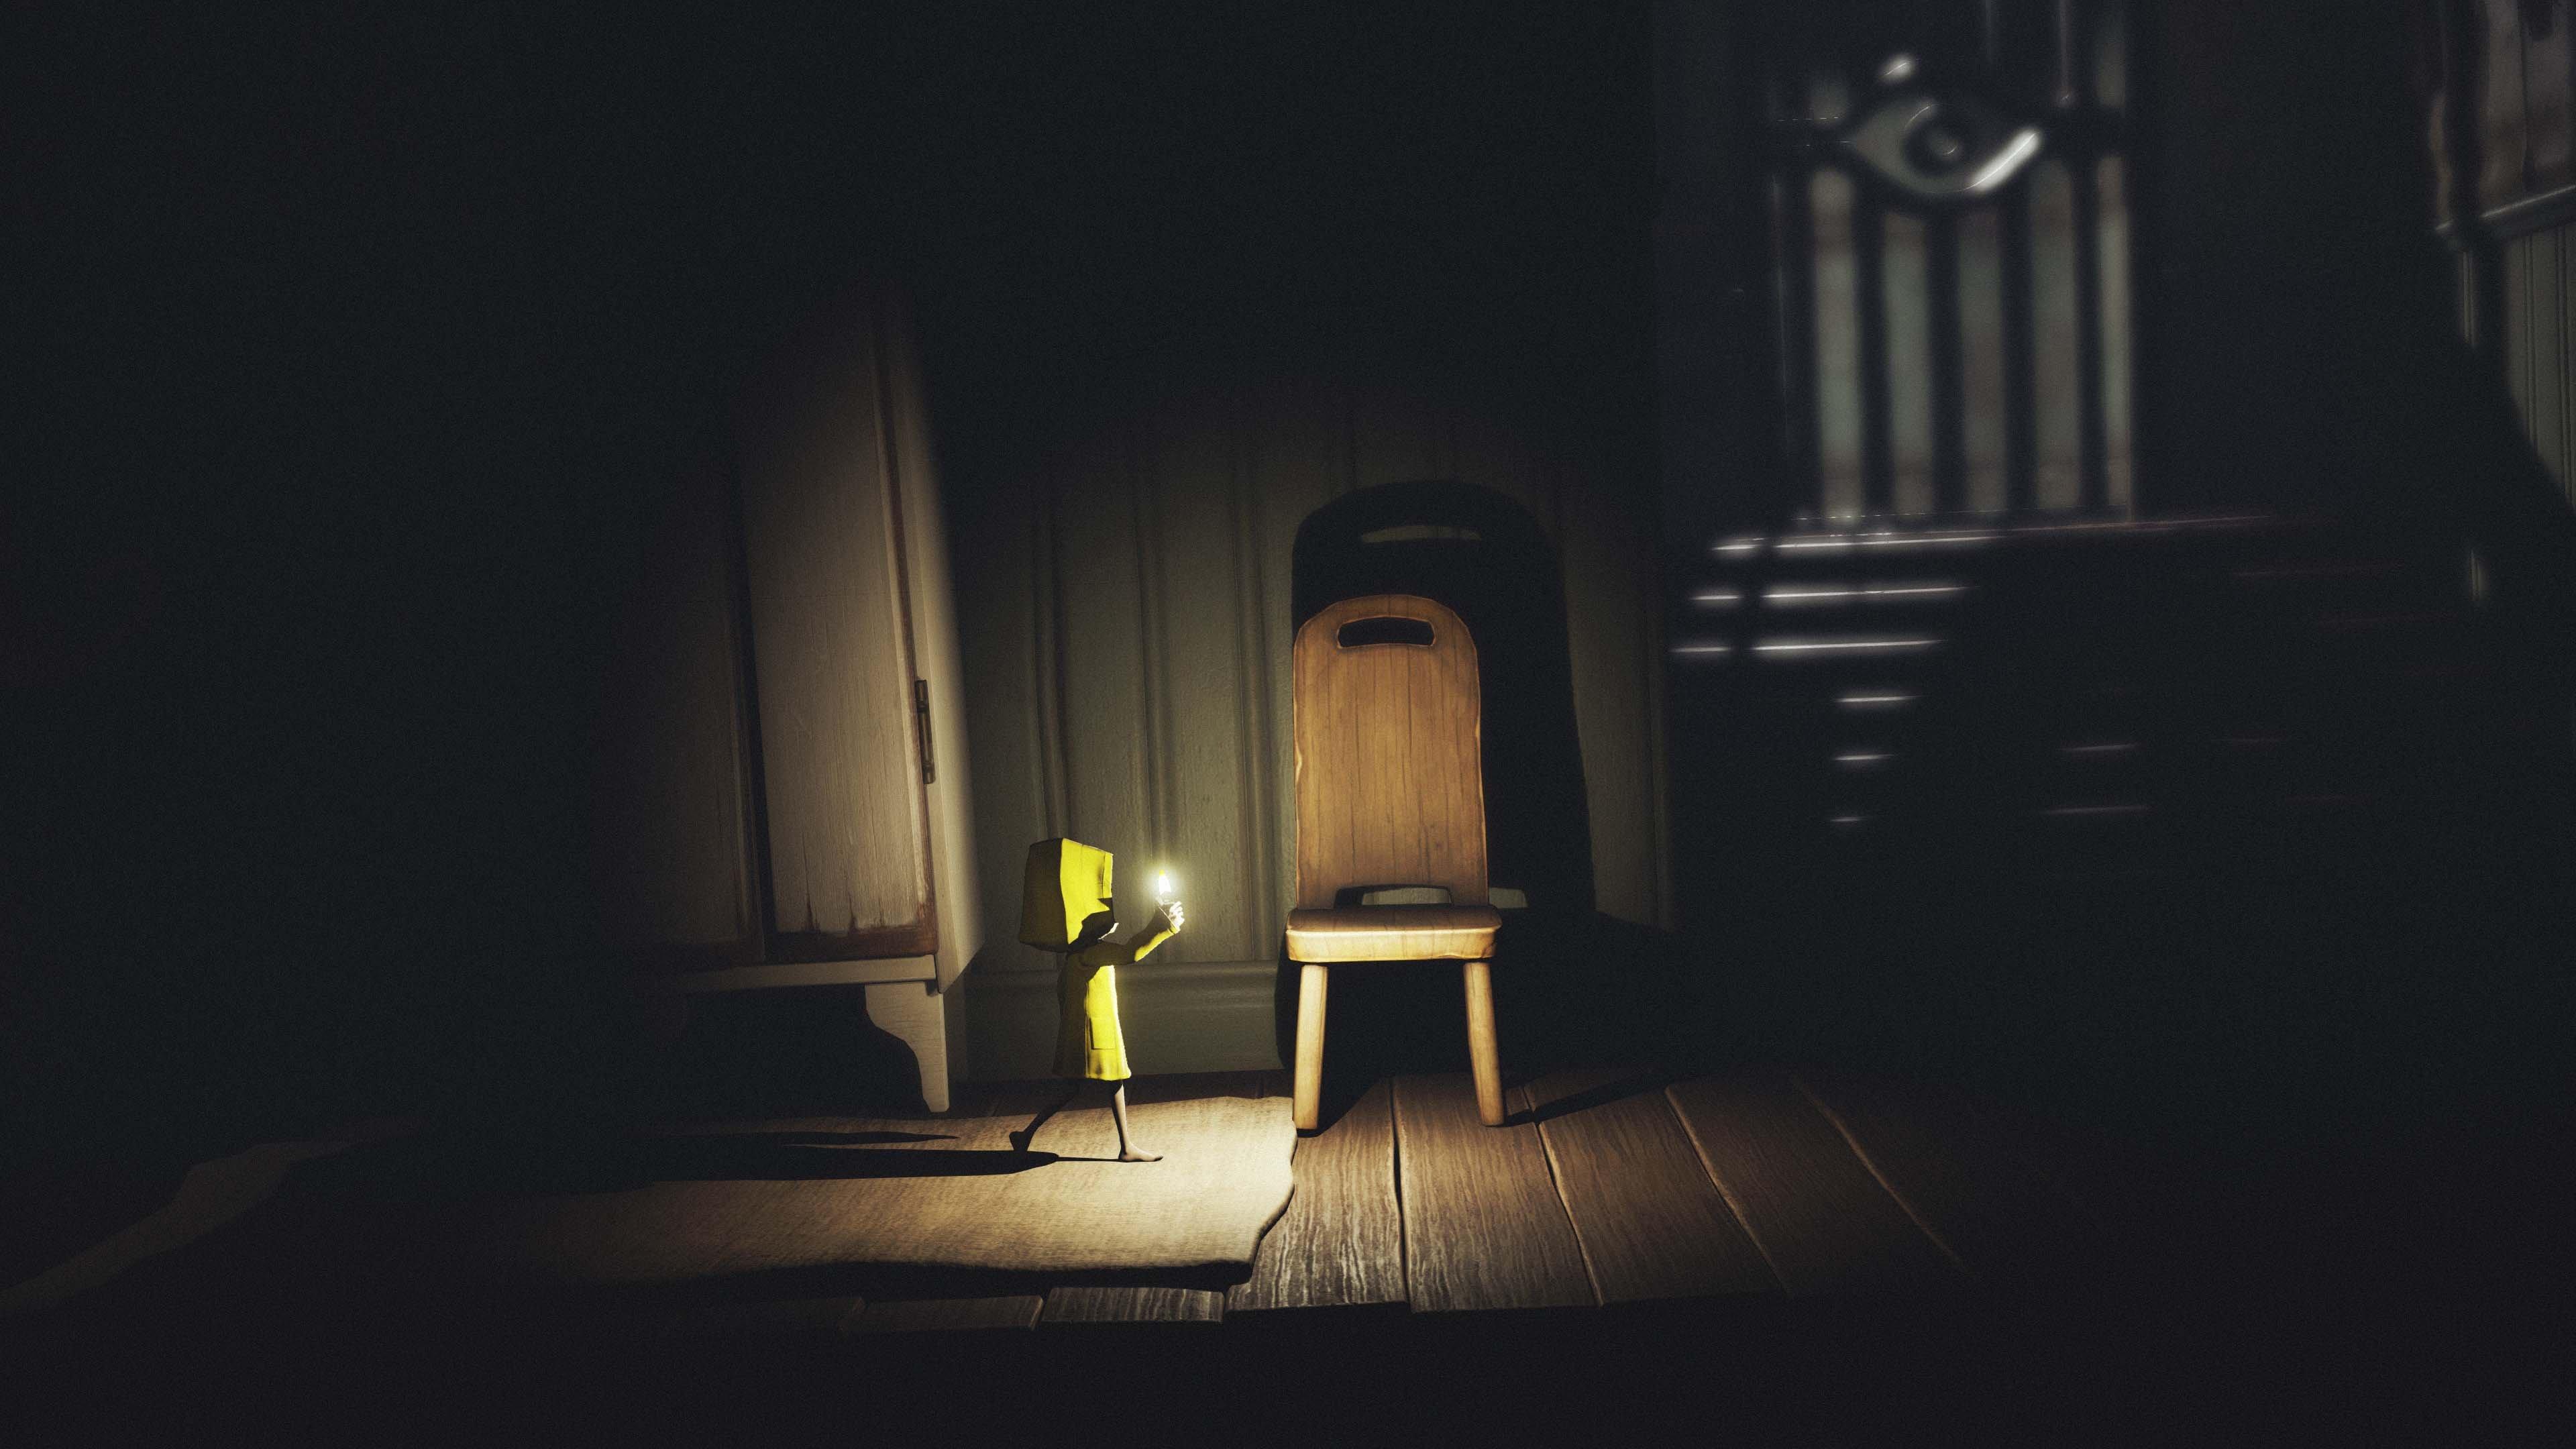 LITTLE NIGHTMARES COMPLETE EDITION - XBOX ONE